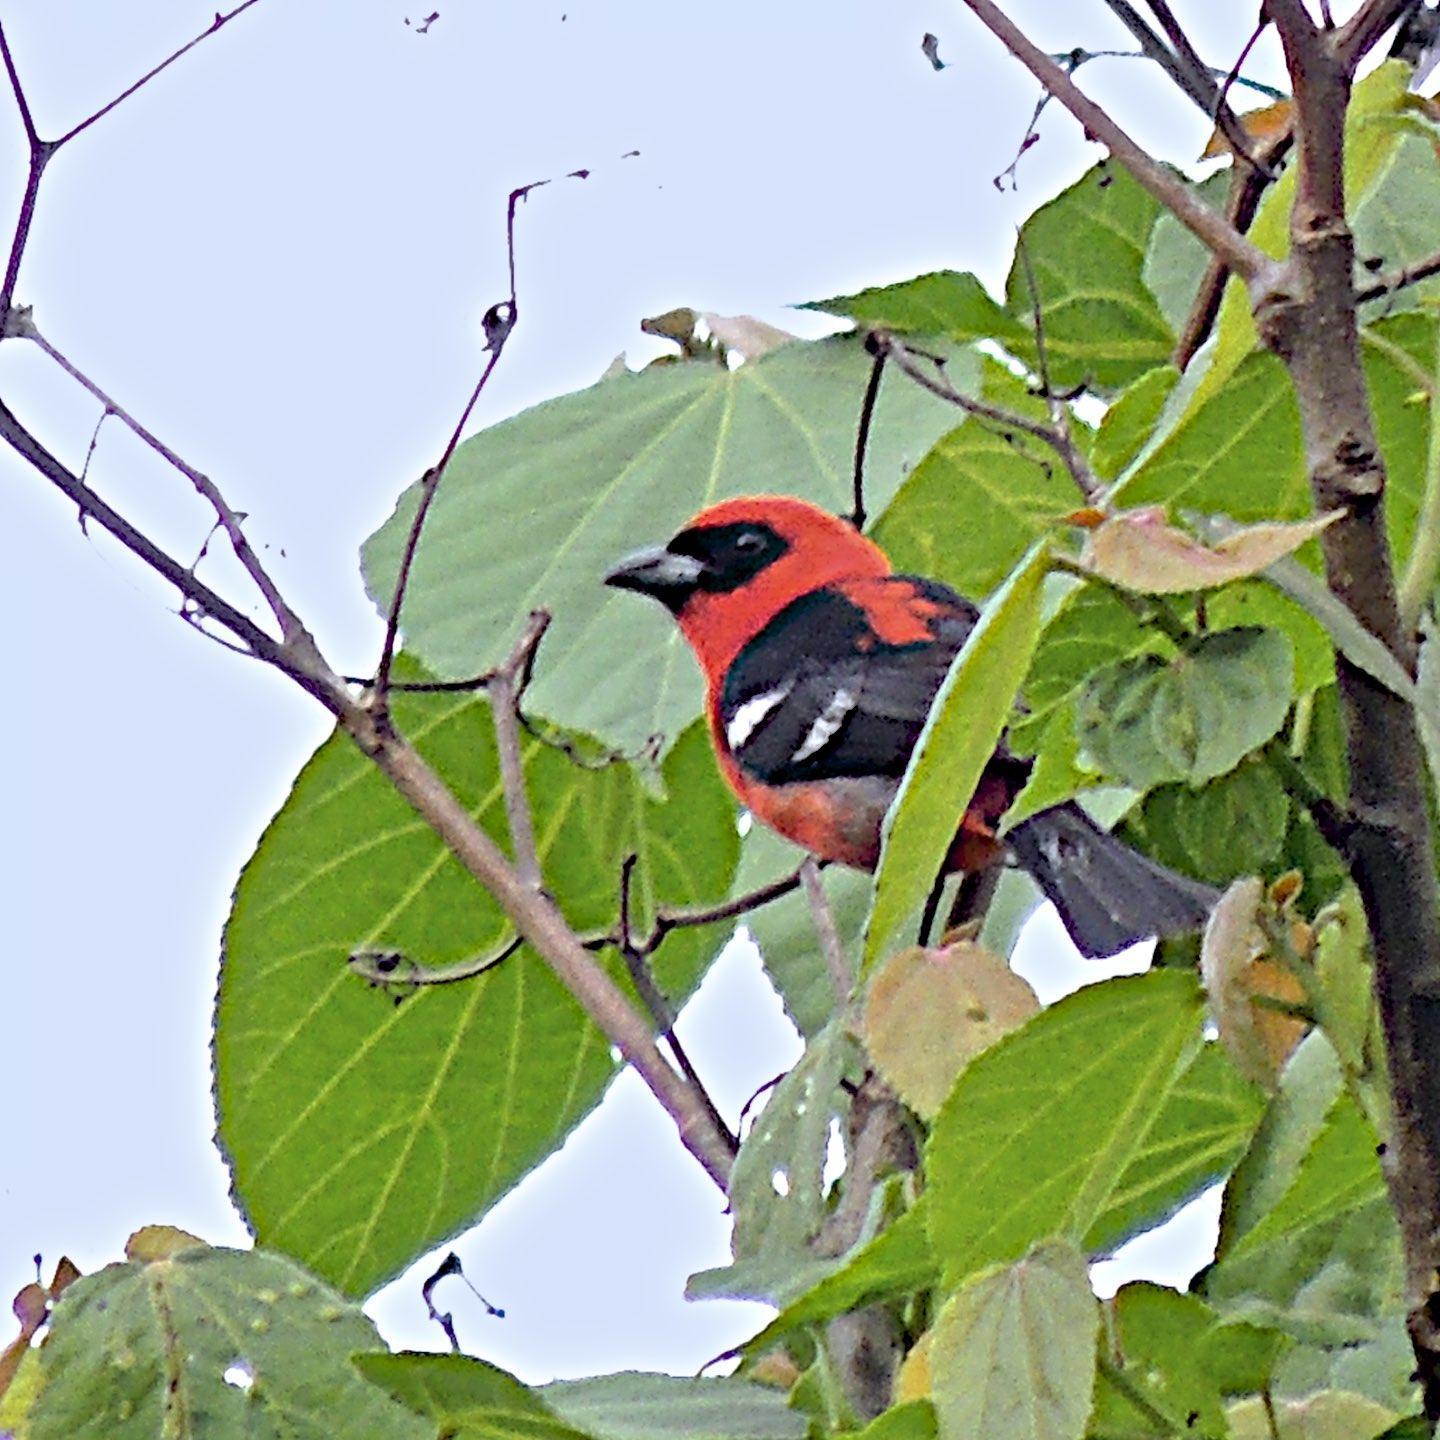 White-winged Tanager Photo by Andres Duarte